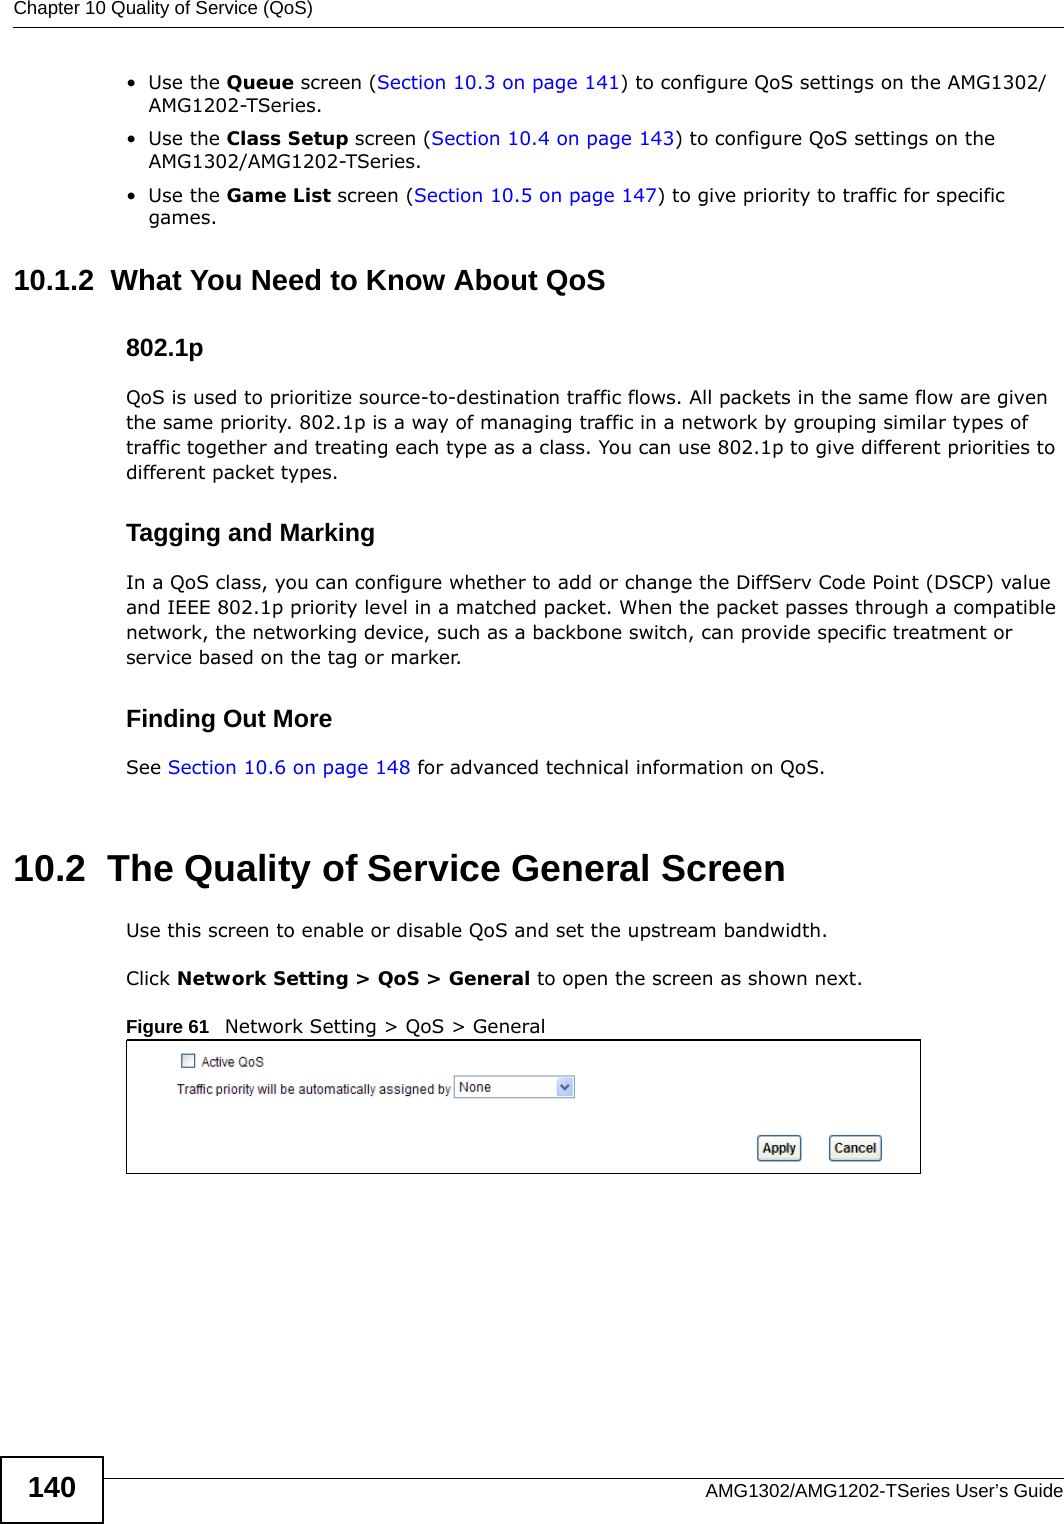 Chapter 10 Quality of Service (QoS)AMG1302/AMG1202-TSeries User’s Guide140•Use the Queue screen (Section 10.3 on page 141) to configure QoS settings on the AMG1302/AMG1202-TSeries.•Use the Class Setup screen (Section 10.4 on page 143) to configure QoS settings on the AMG1302/AMG1202-TSeries.•Use the Game List screen (Section 10.5 on page 147) to give priority to traffic for specific games.10.1.2  What You Need to Know About QoS802.1pQoS is used to prioritize source-to-destination traffic flows. All packets in the same flow are given the same priority. 802.1p is a way of managing traffic in a network by grouping similar types of traffic together and treating each type as a class. You can use 802.1p to give different priorities to different packet types. Tagging and MarkingIn a QoS class, you can configure whether to add or change the DiffServ Code Point (DSCP) value and IEEE 802.1p priority level in a matched packet. When the packet passes through a compatible network, the networking device, such as a backbone switch, can provide specific treatment or service based on the tag or marker.Finding Out MoreSee Section 10.6 on page 148 for advanced technical information on QoS.10.2  The Quality of Service General ScreenUse this screen to enable or disable QoS and set the upstream bandwidth.Click Network Setting &gt; QoS &gt; General to open the screen as shown next.Figure 61   Network Setting &gt; QoS &gt; General